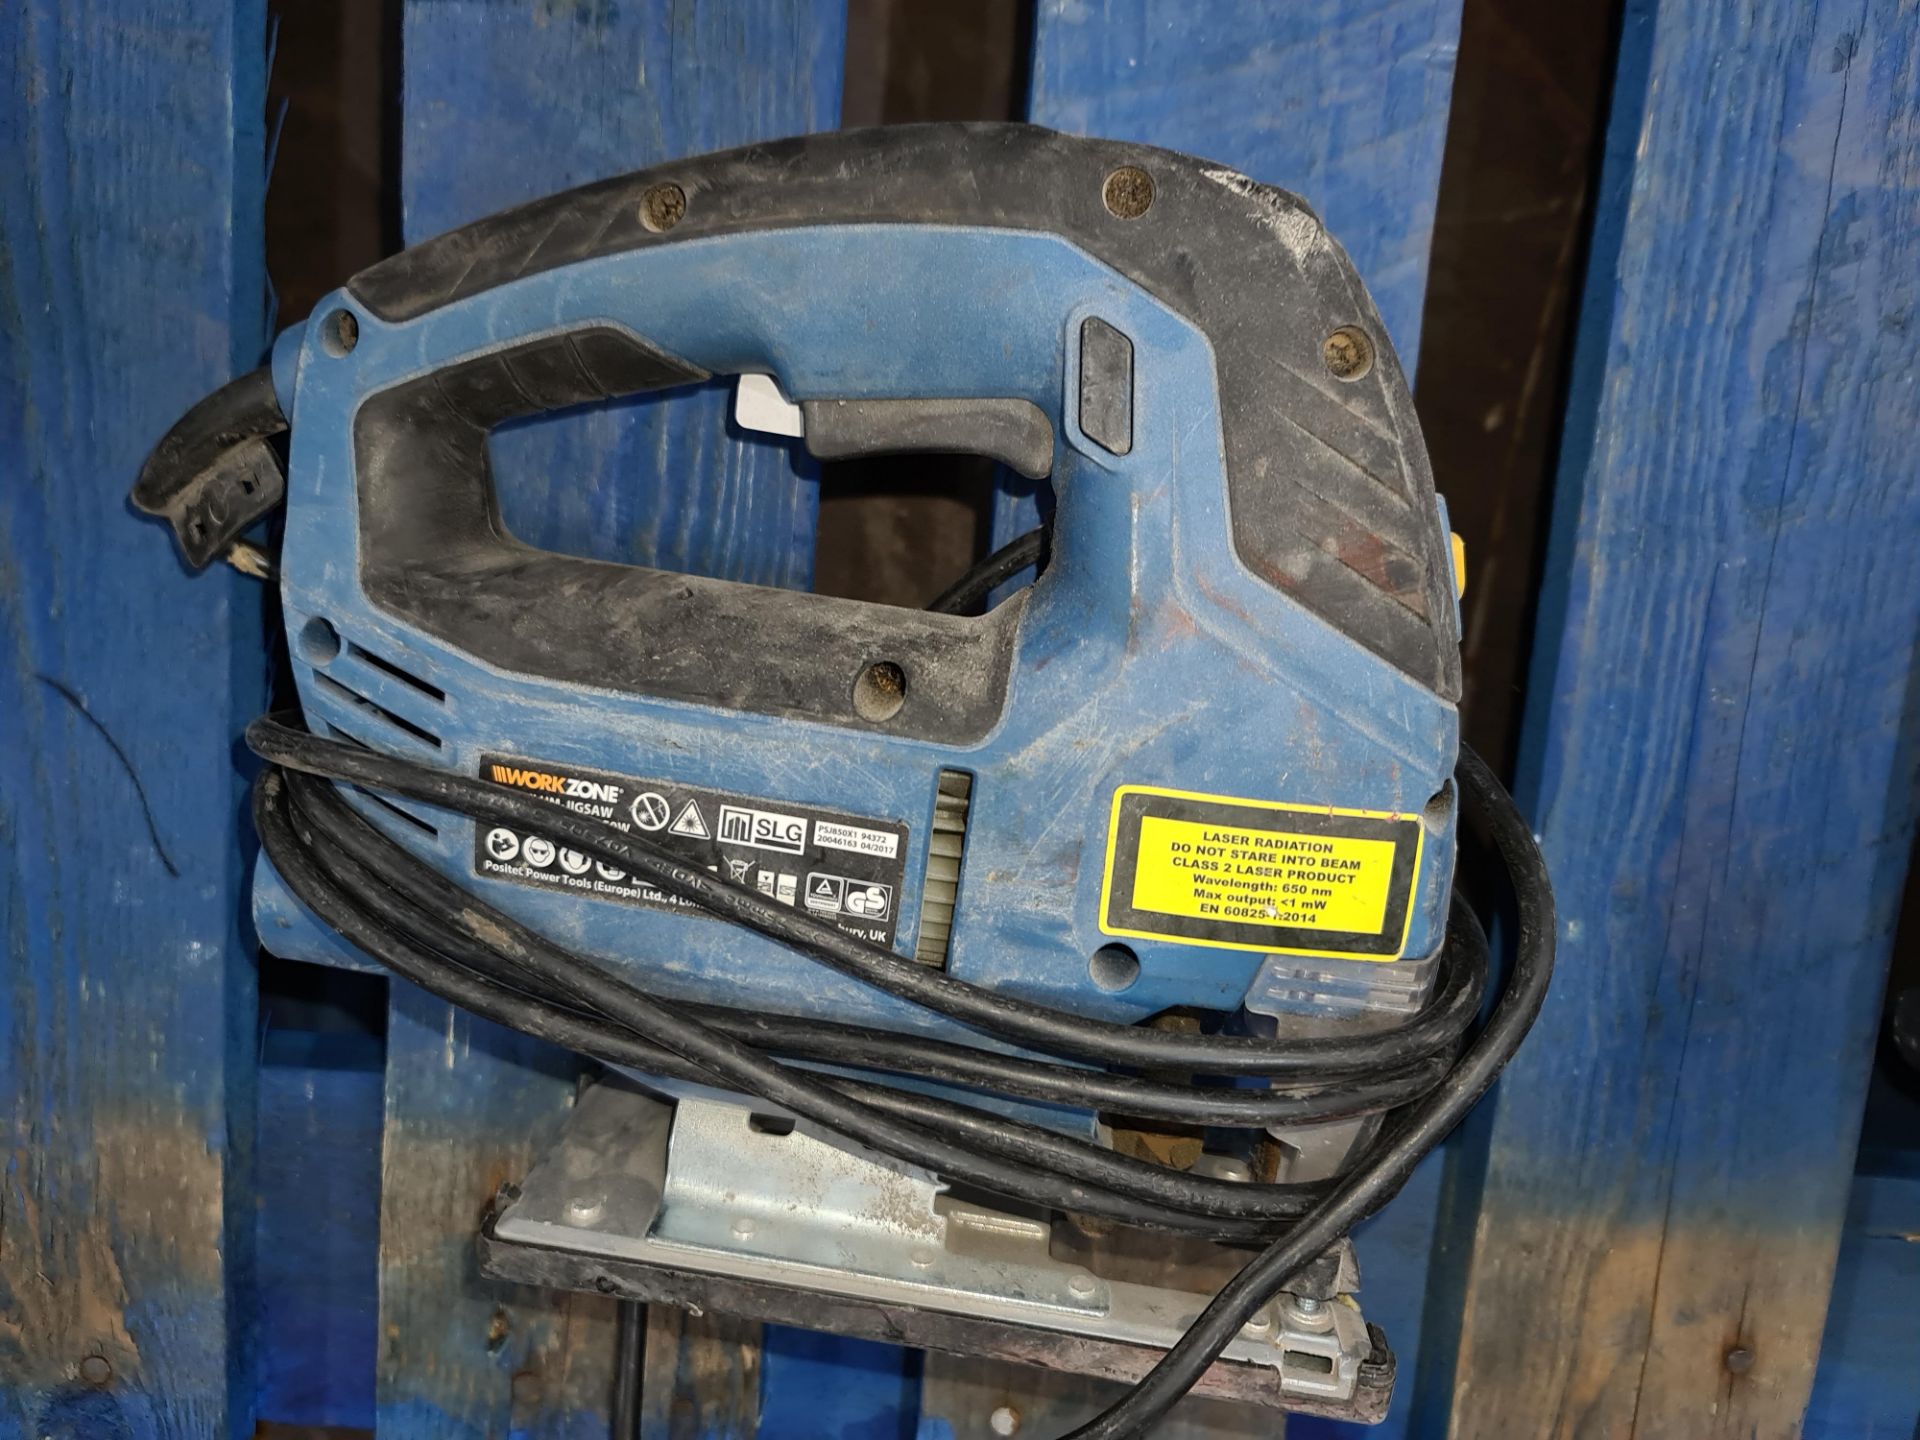 Workzone electric jig saw - Image 2 of 3